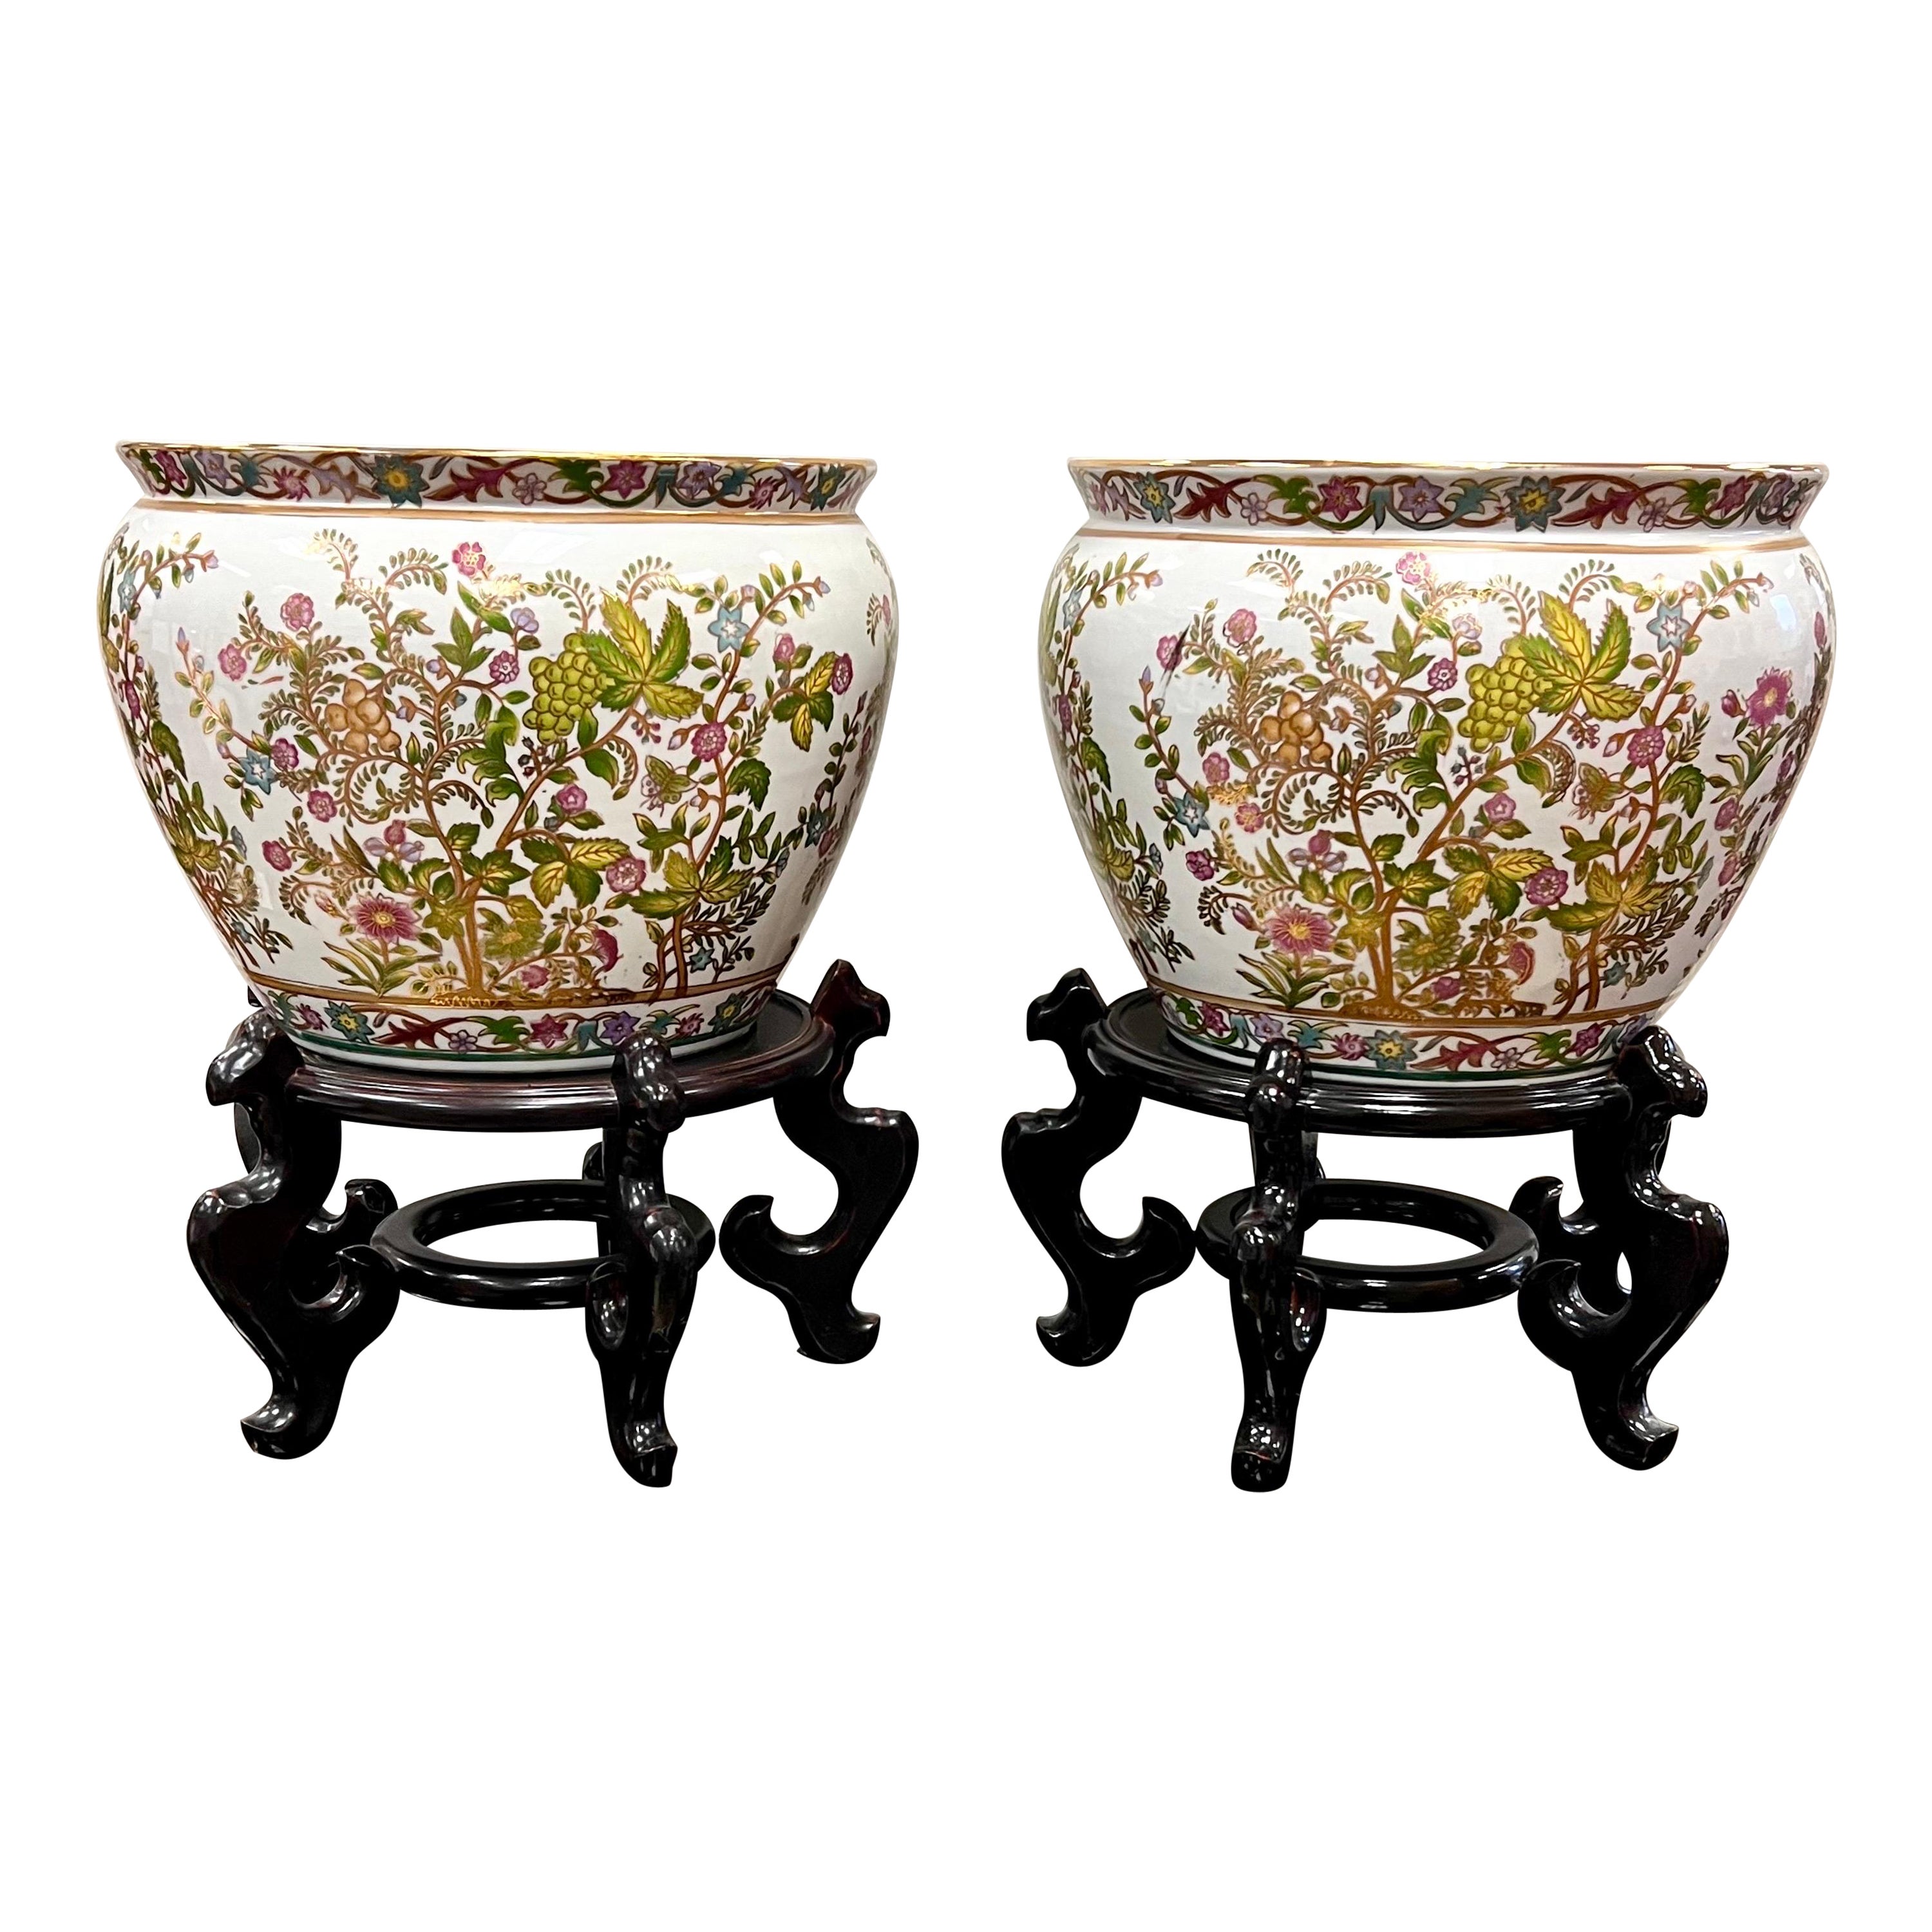 Pair of Chinese Pink & Green Fishbowls Planters Jardinieres on Carved Pedestals For Sale